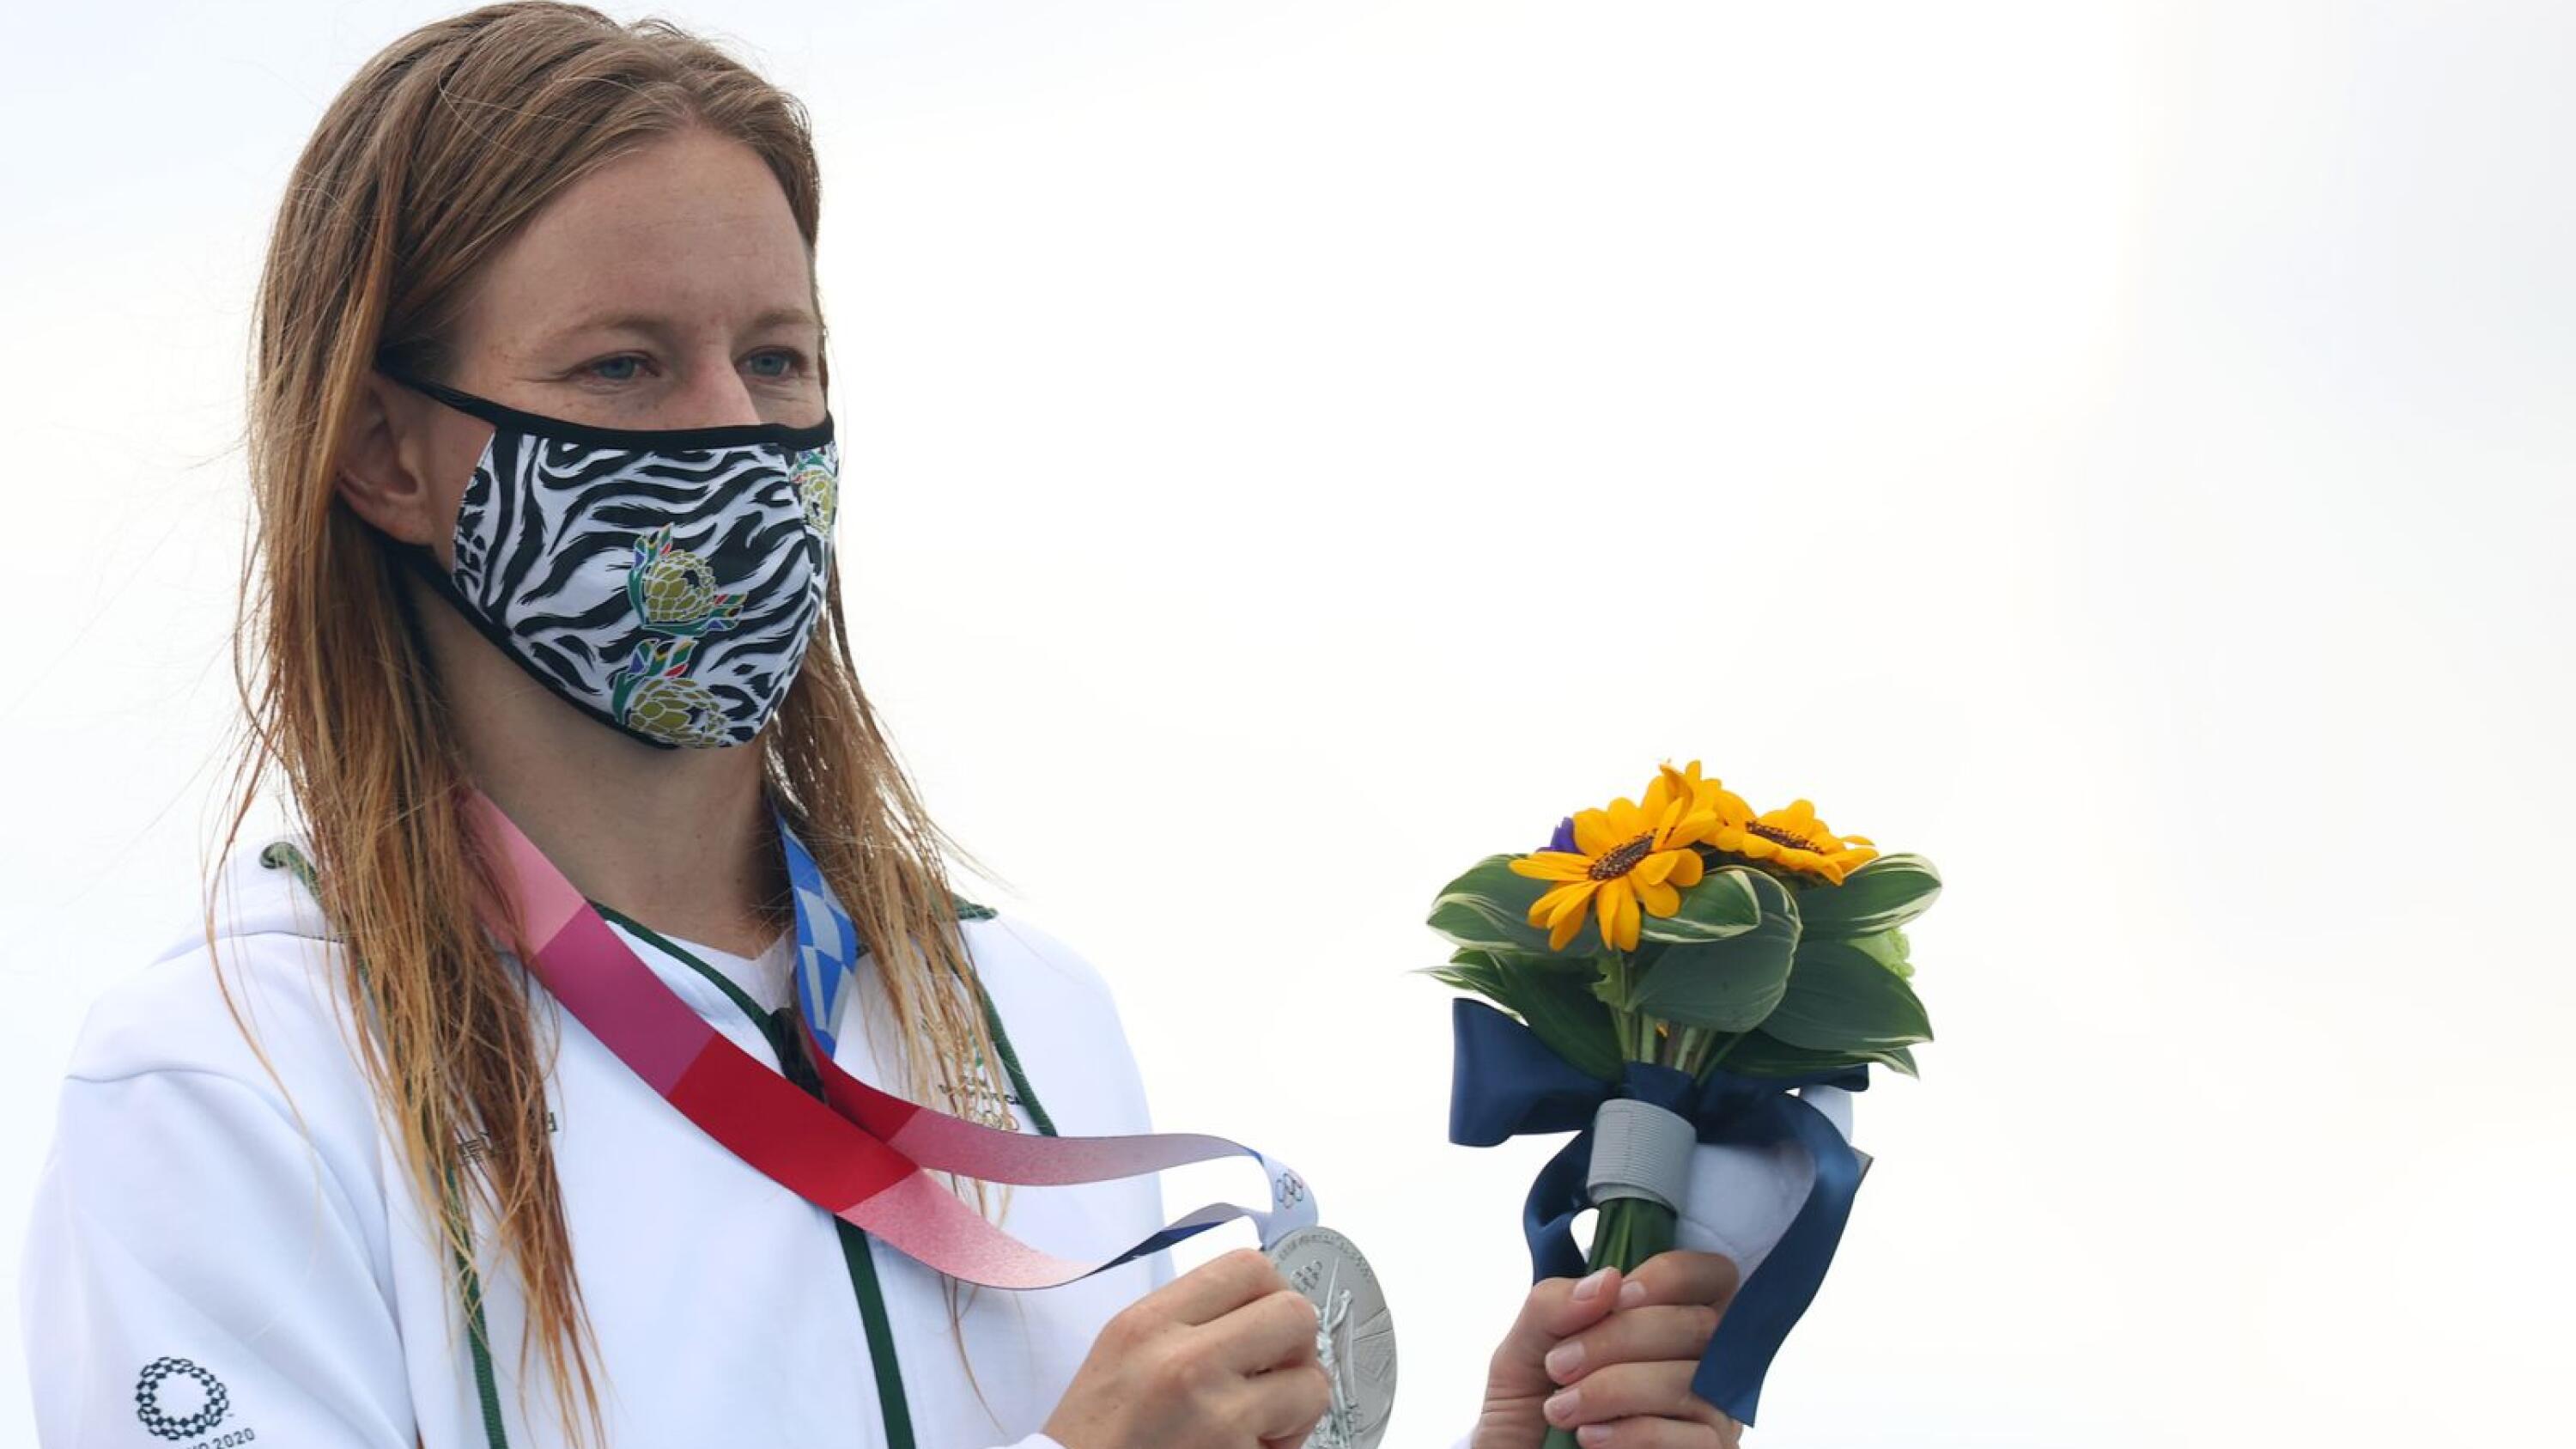 Silver medallist, Bianca Buitendag of South Africa wearing a protective face mask poses on the podium